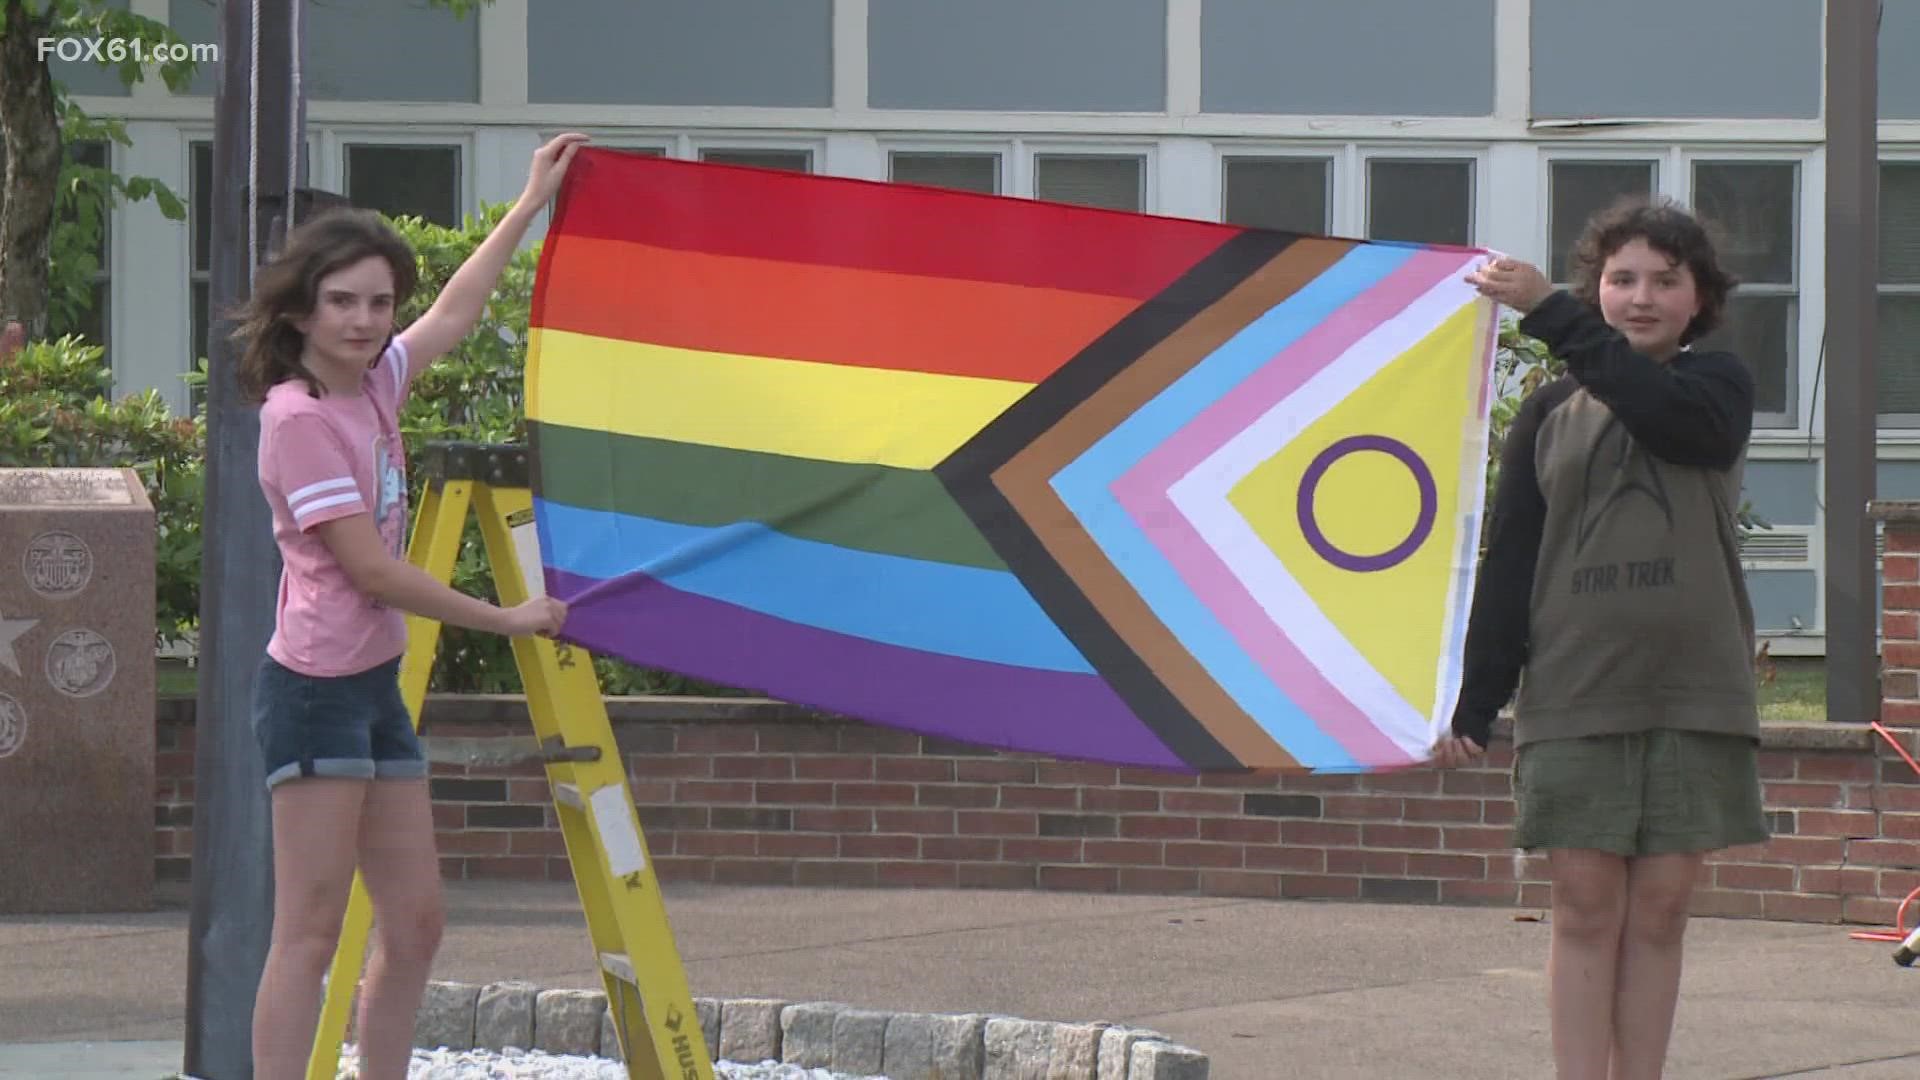 The town is hosting events throughout June, including the first Celebrate Pride festival on June 10.